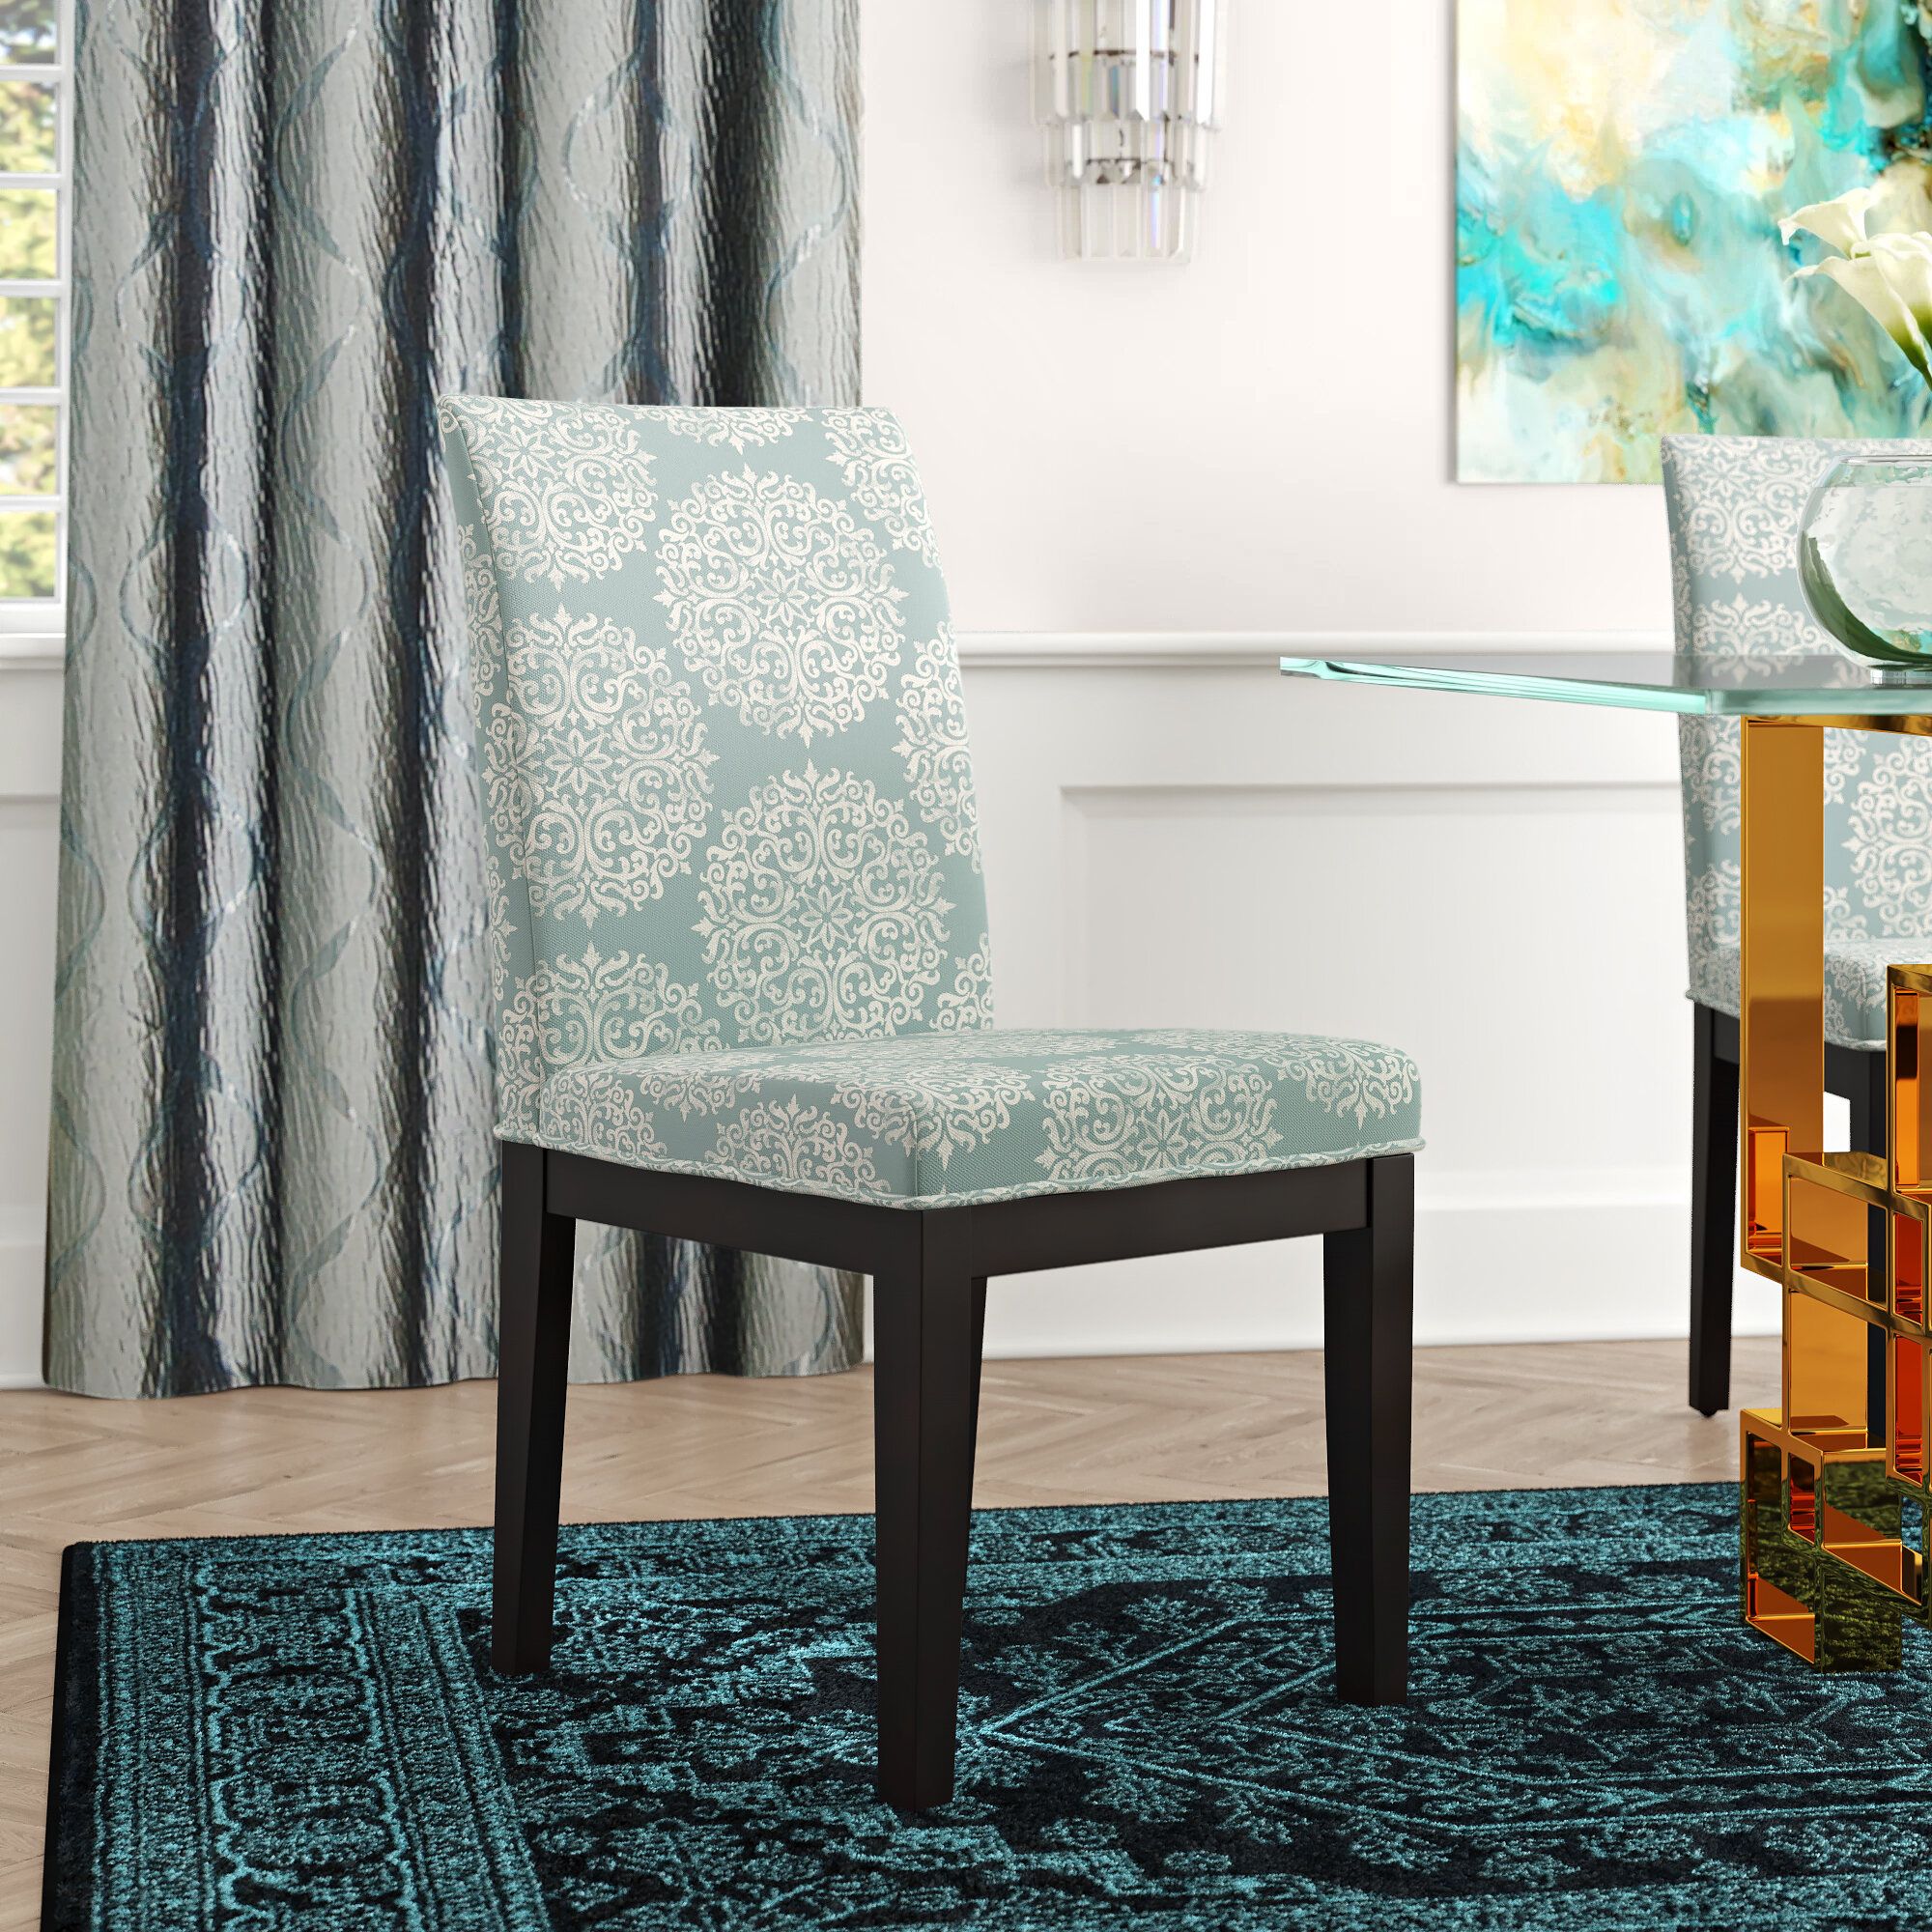 Floral Accent Chairs Under $150 You'Ll Love In 2021 | Wayfair Pertaining To Ansby Barrel Chairs (View 9 of 15)